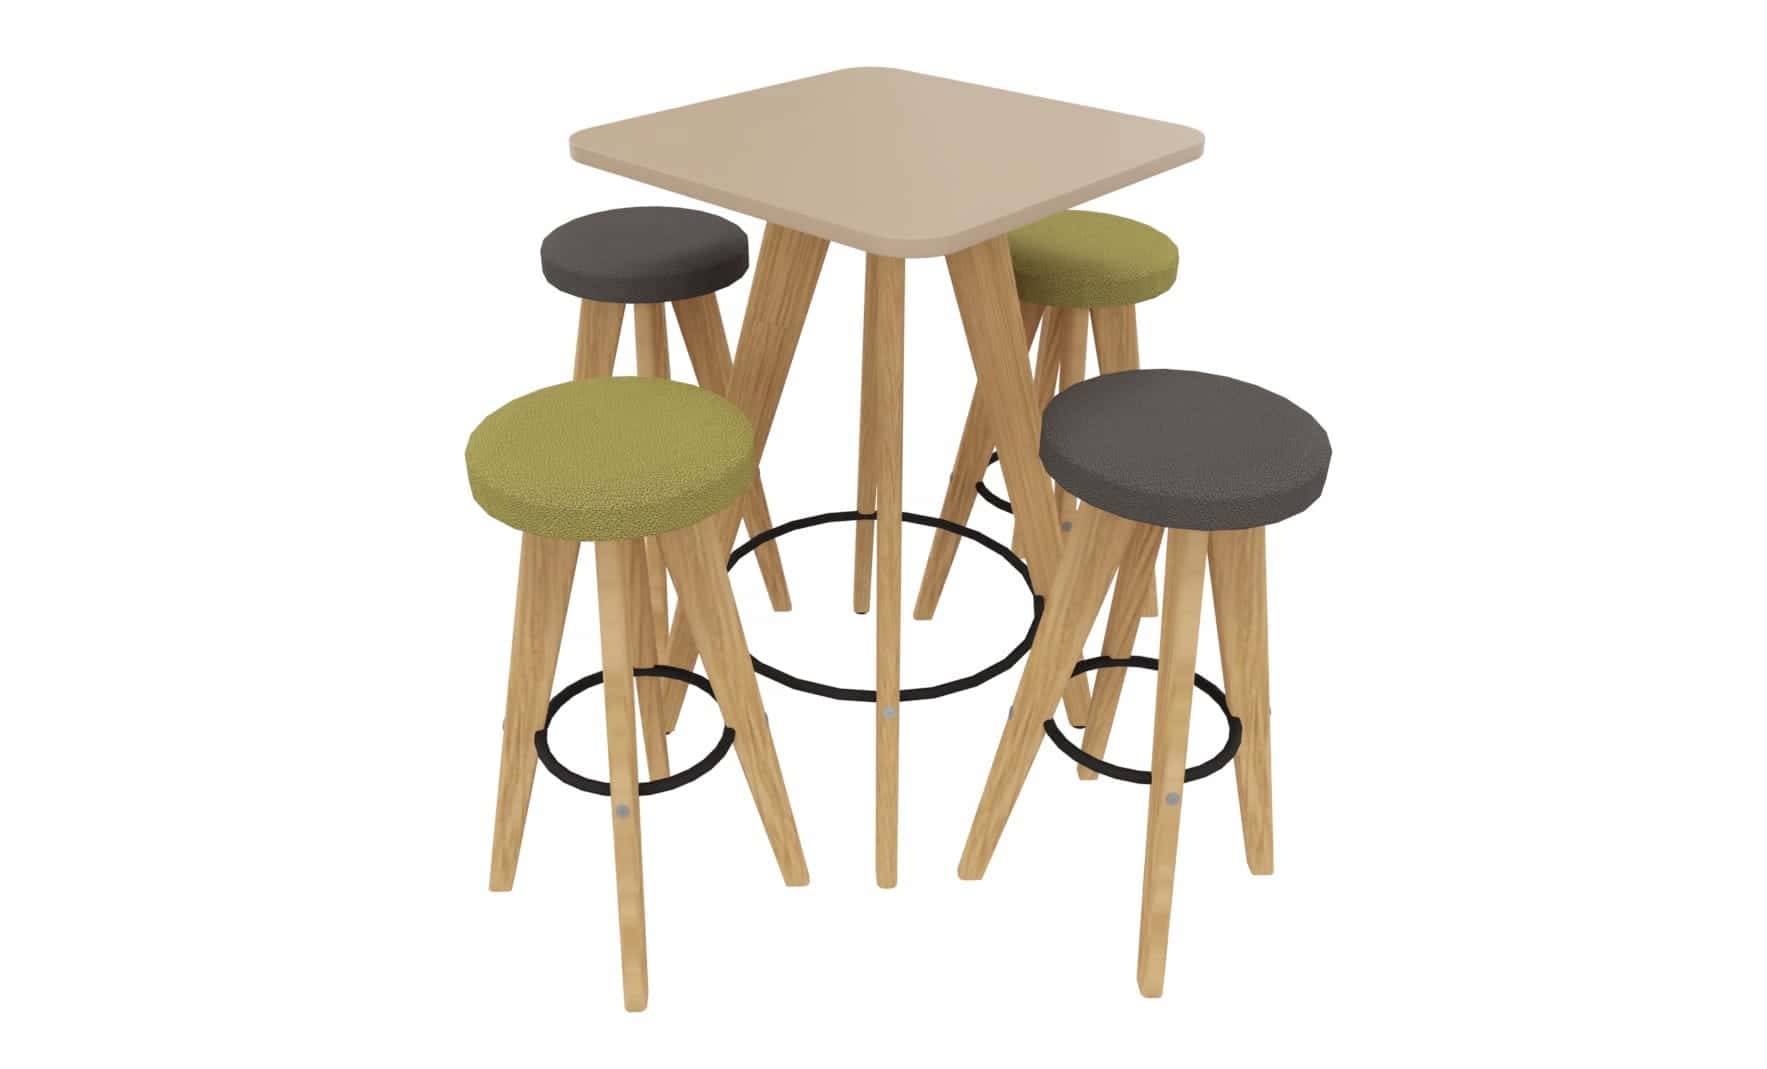 Solid Oak Stools And Table